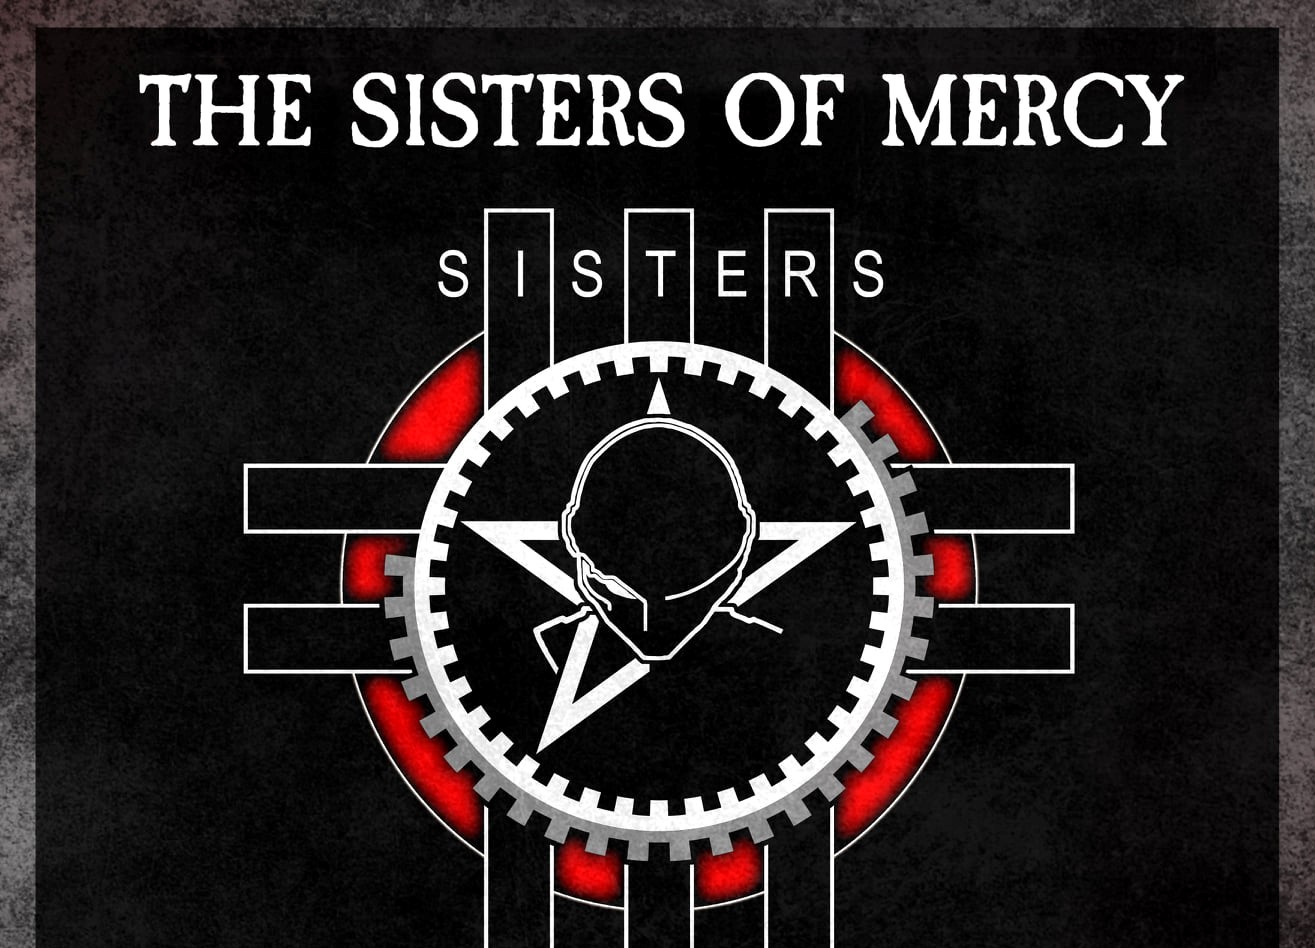 the sisters of mercy pic 1